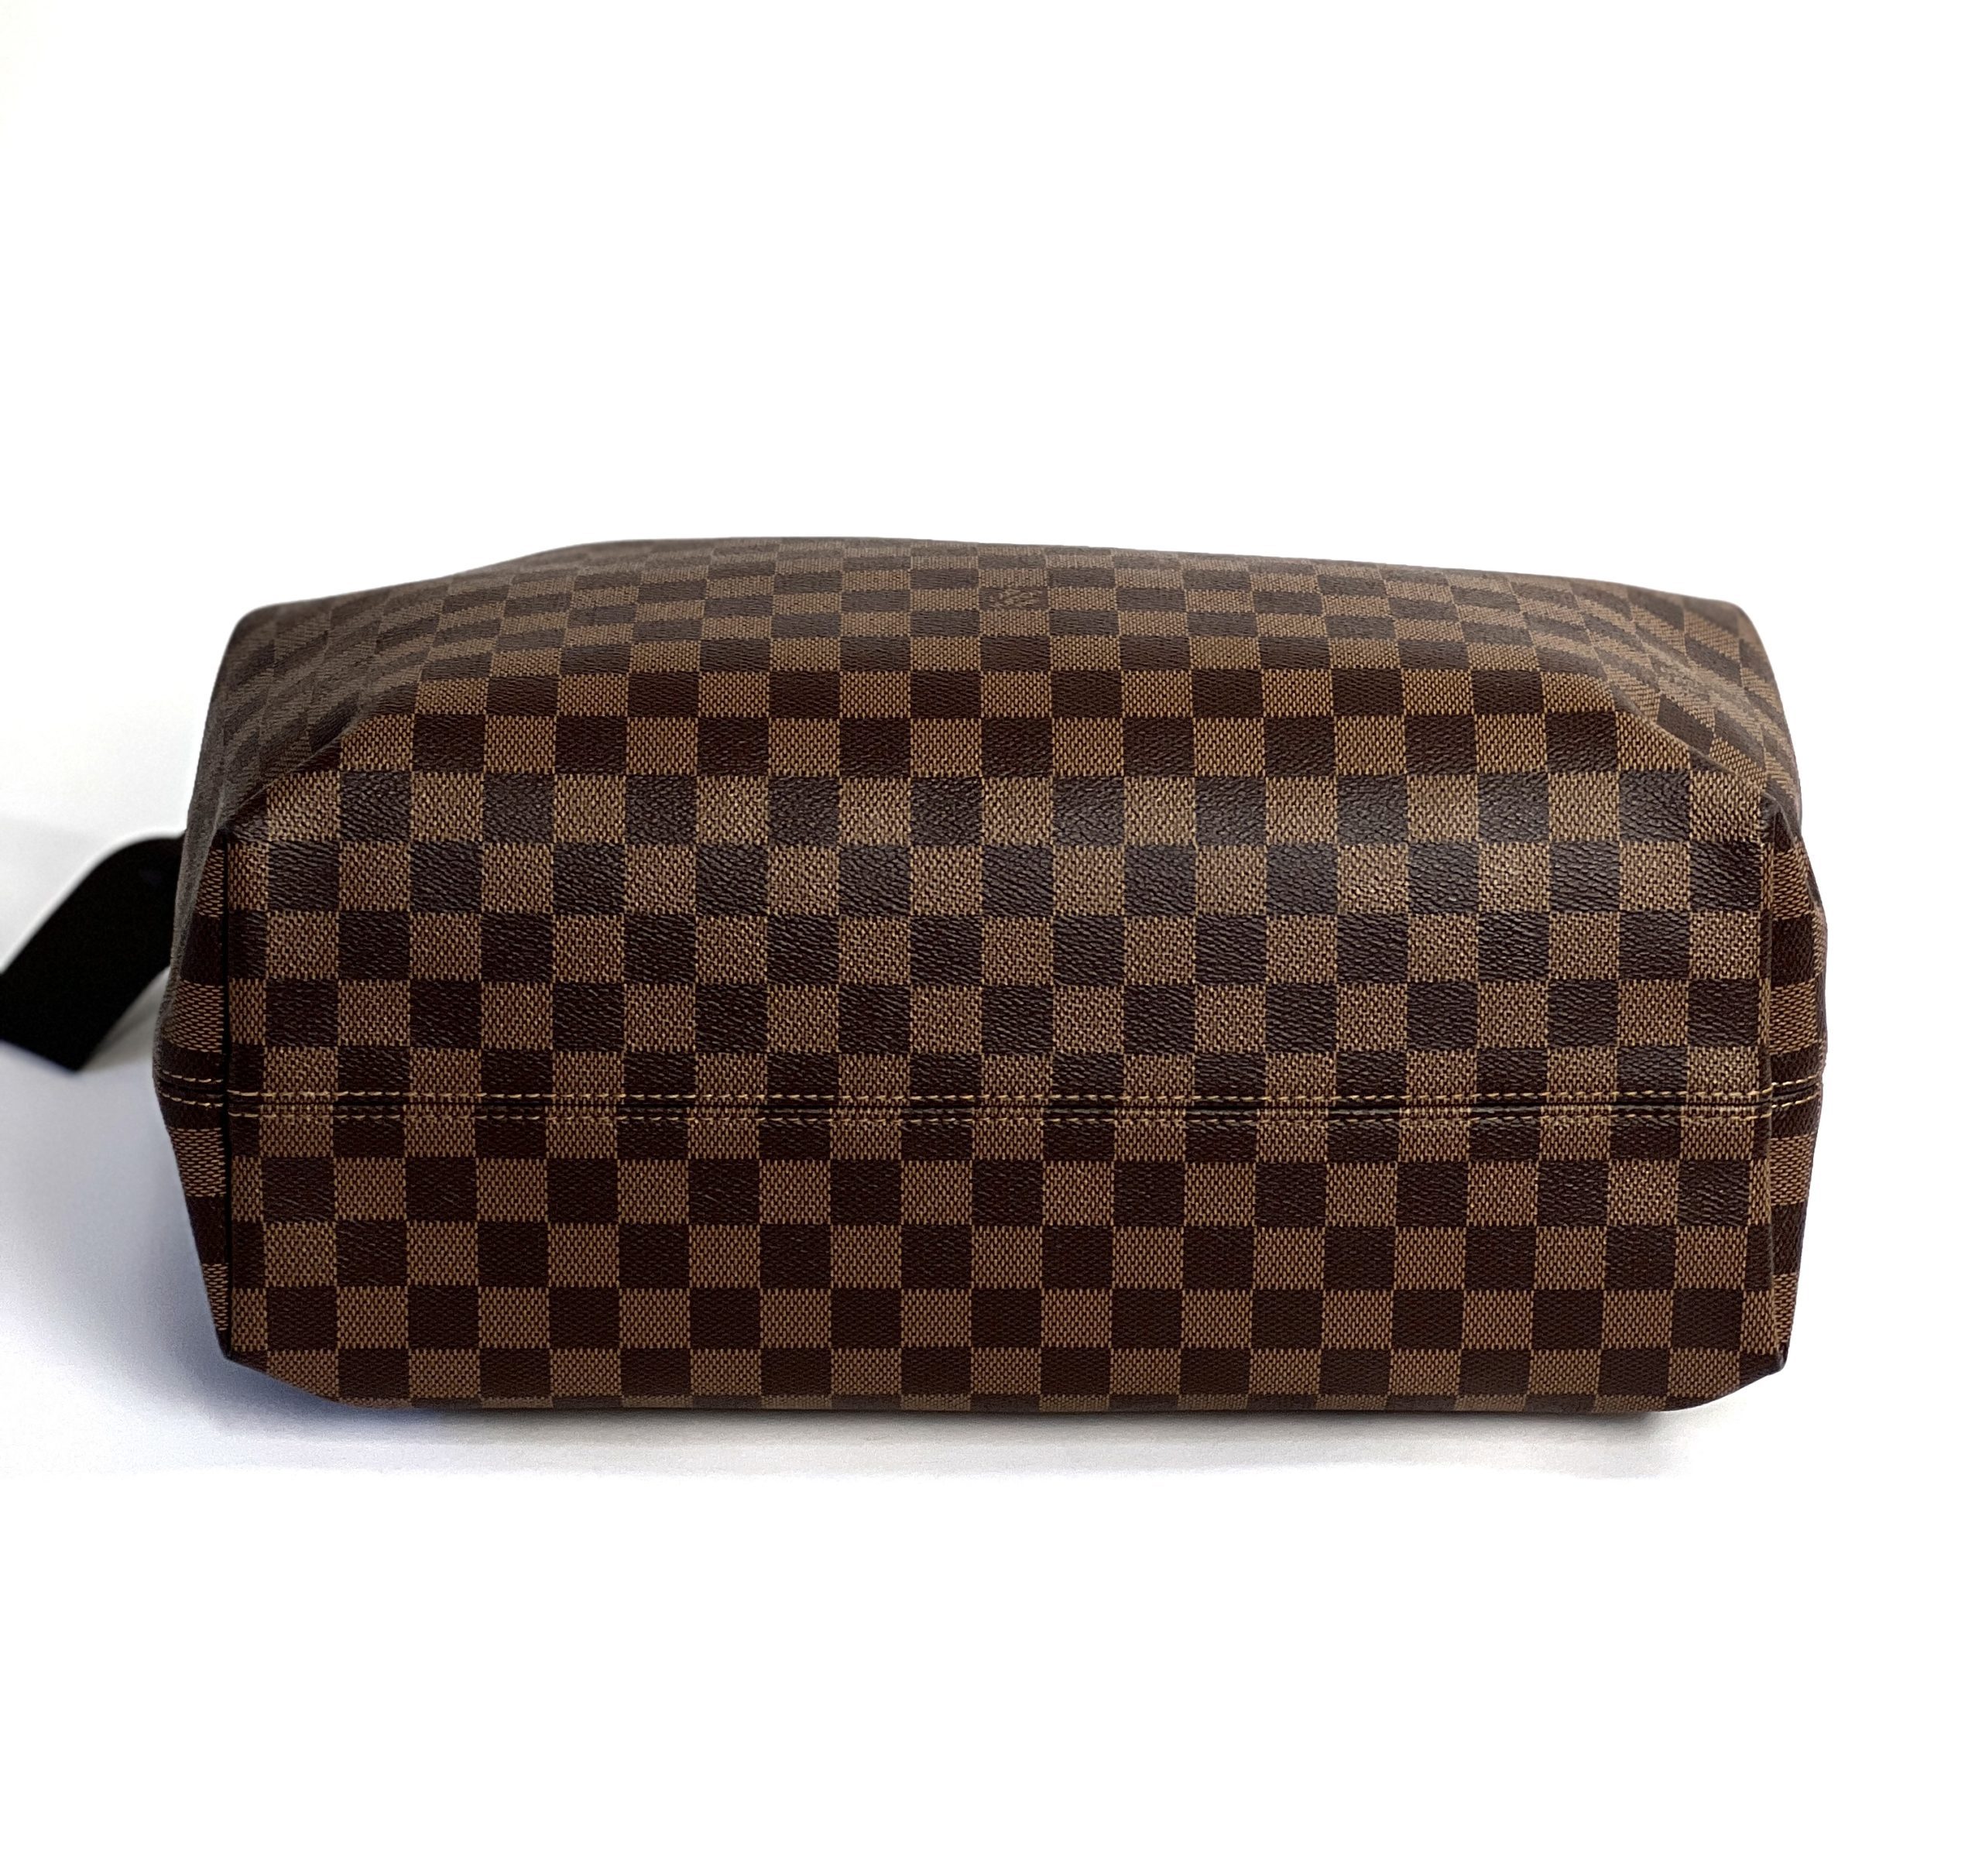 Louis Vuitton Damier Ebene Graceful MM Red - A World Of Goods For You, LLC